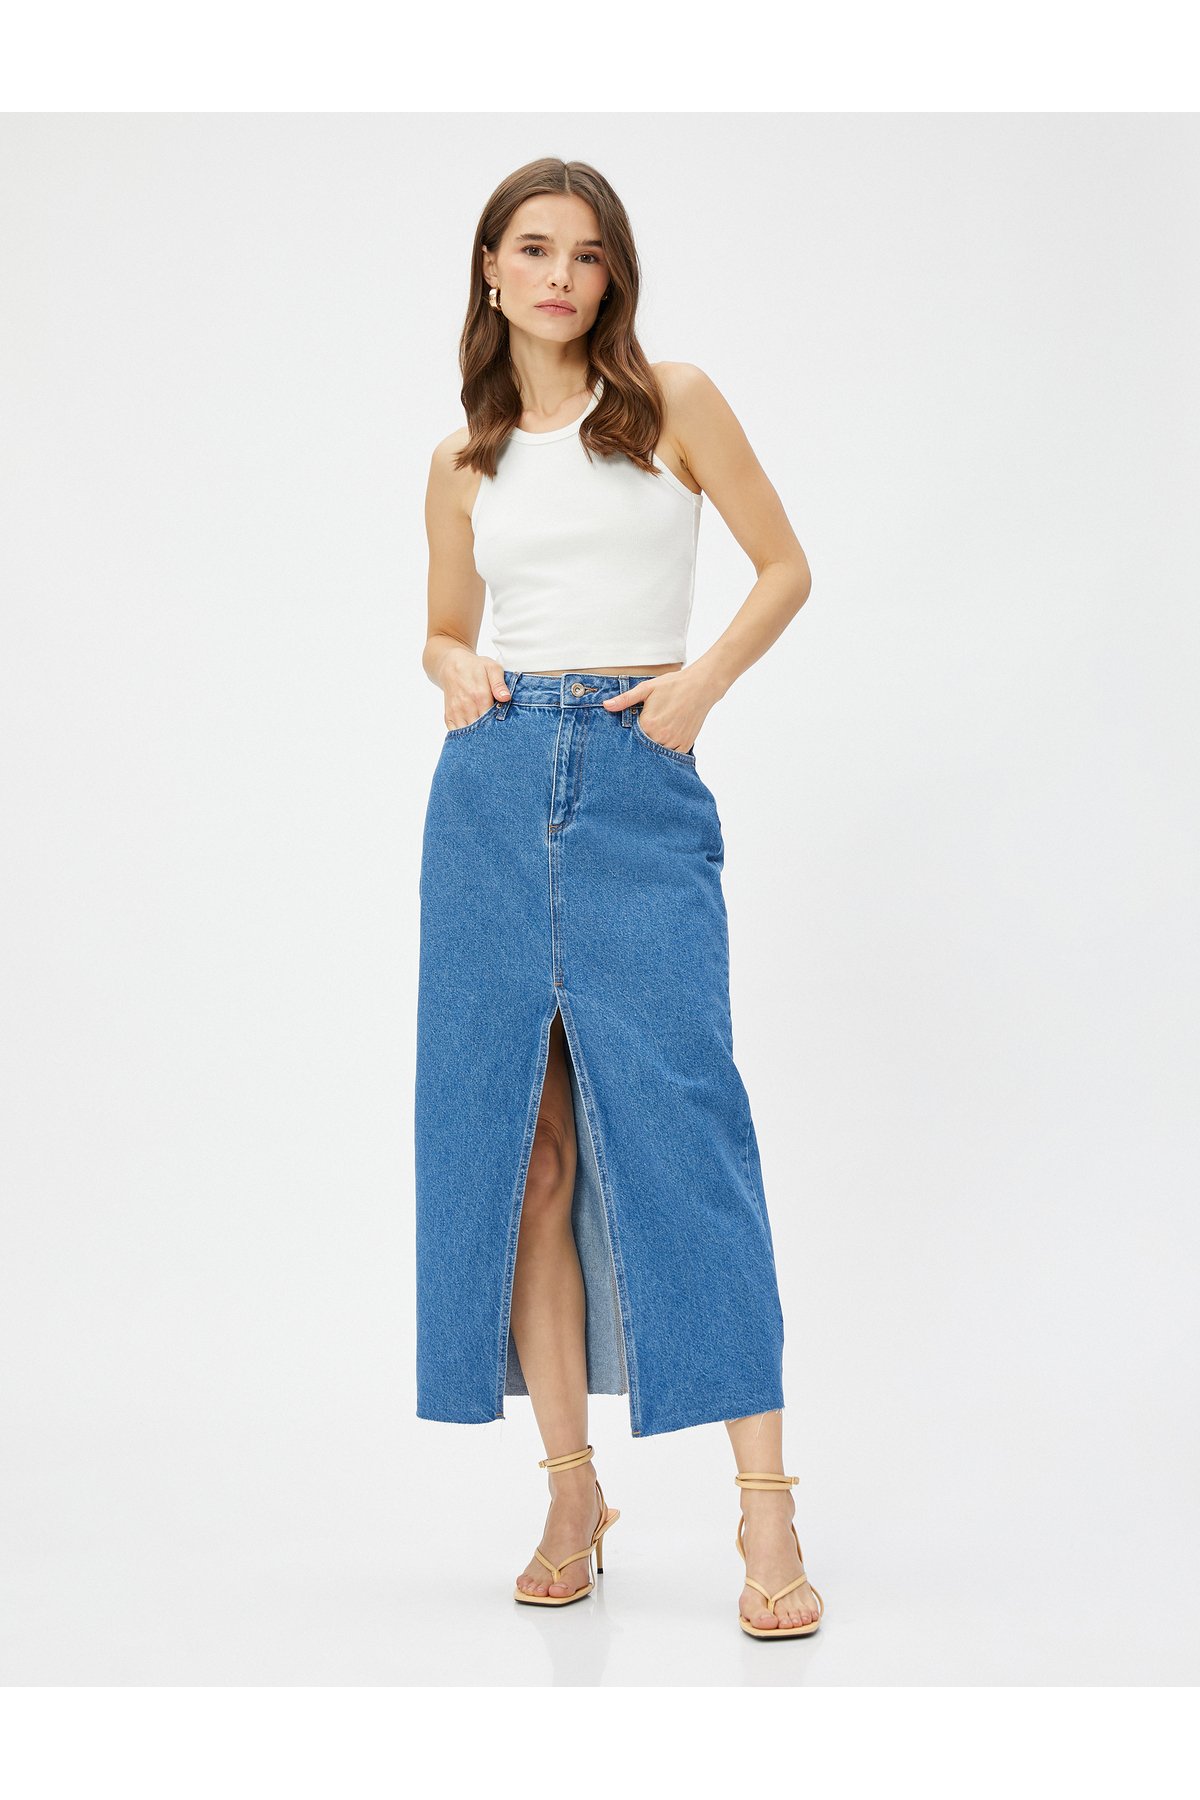 Koton Midi Denim Skirt with a Slit Detail Pocket and Button fastening.